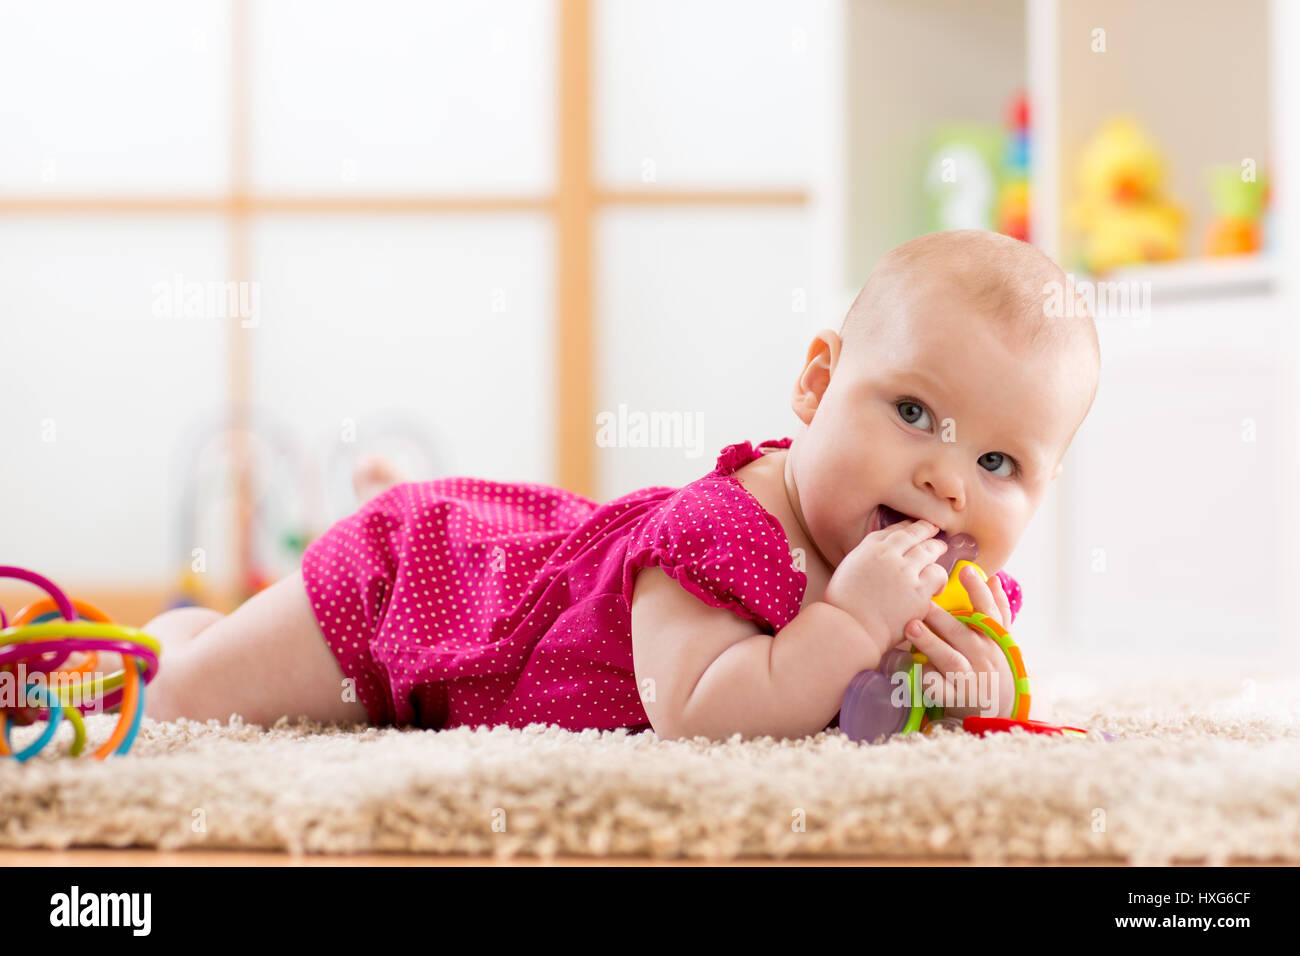 Baby chewing on teething toy Stock Photo